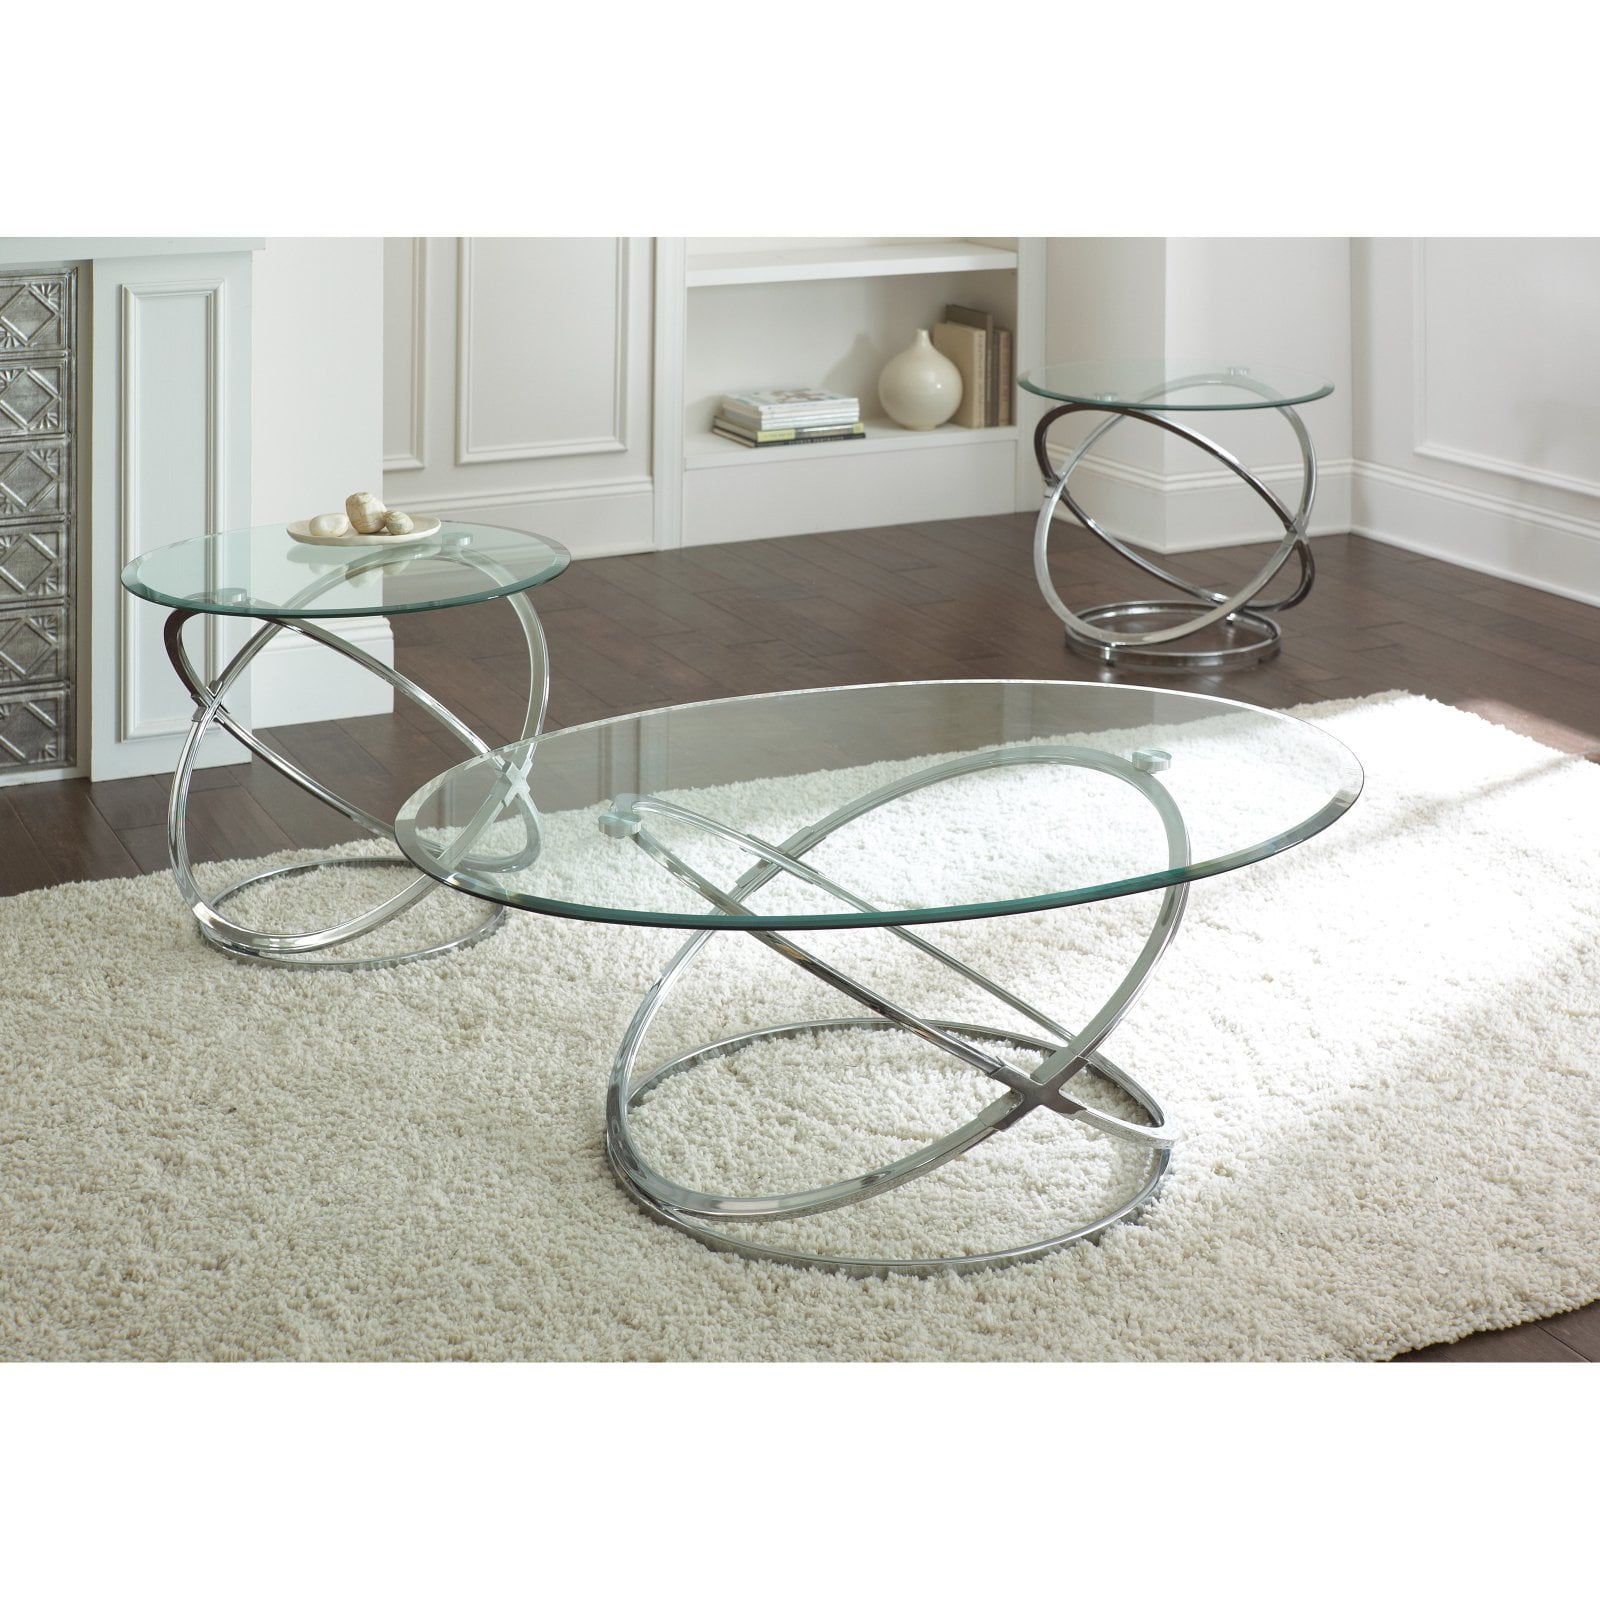 Steve Silver Orion Oval Chrome And Glass Coffee Table Set – Walmart Inside Oval Glass Coffee Tables (Photo 15 of 15)